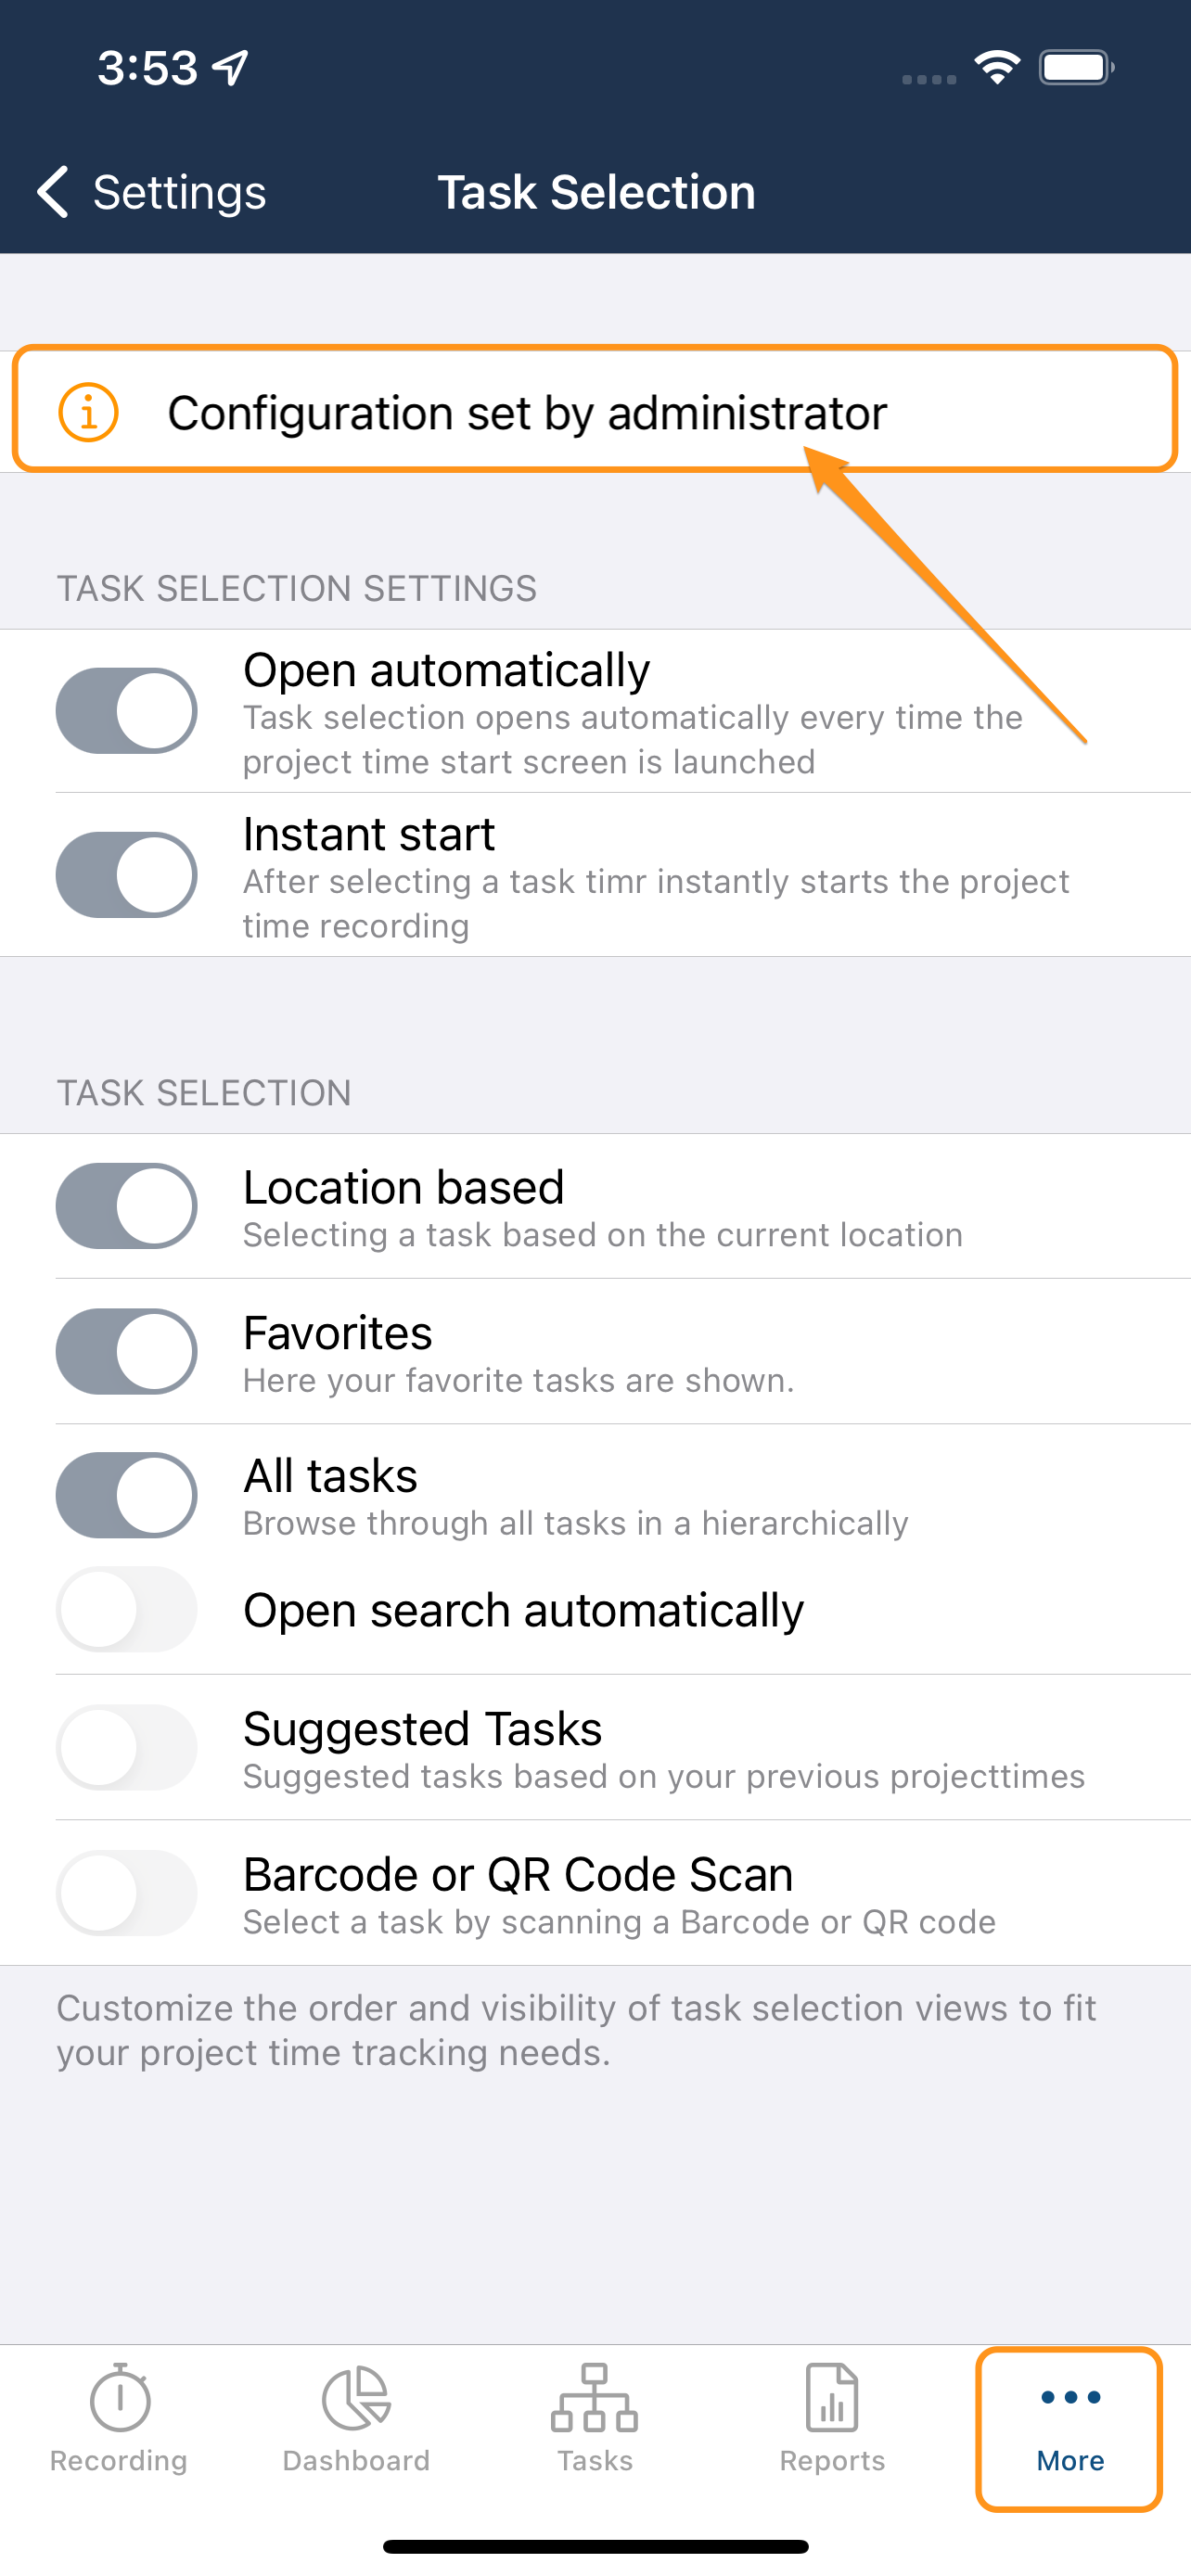 Task_Selection_by_Admin_iOS.png